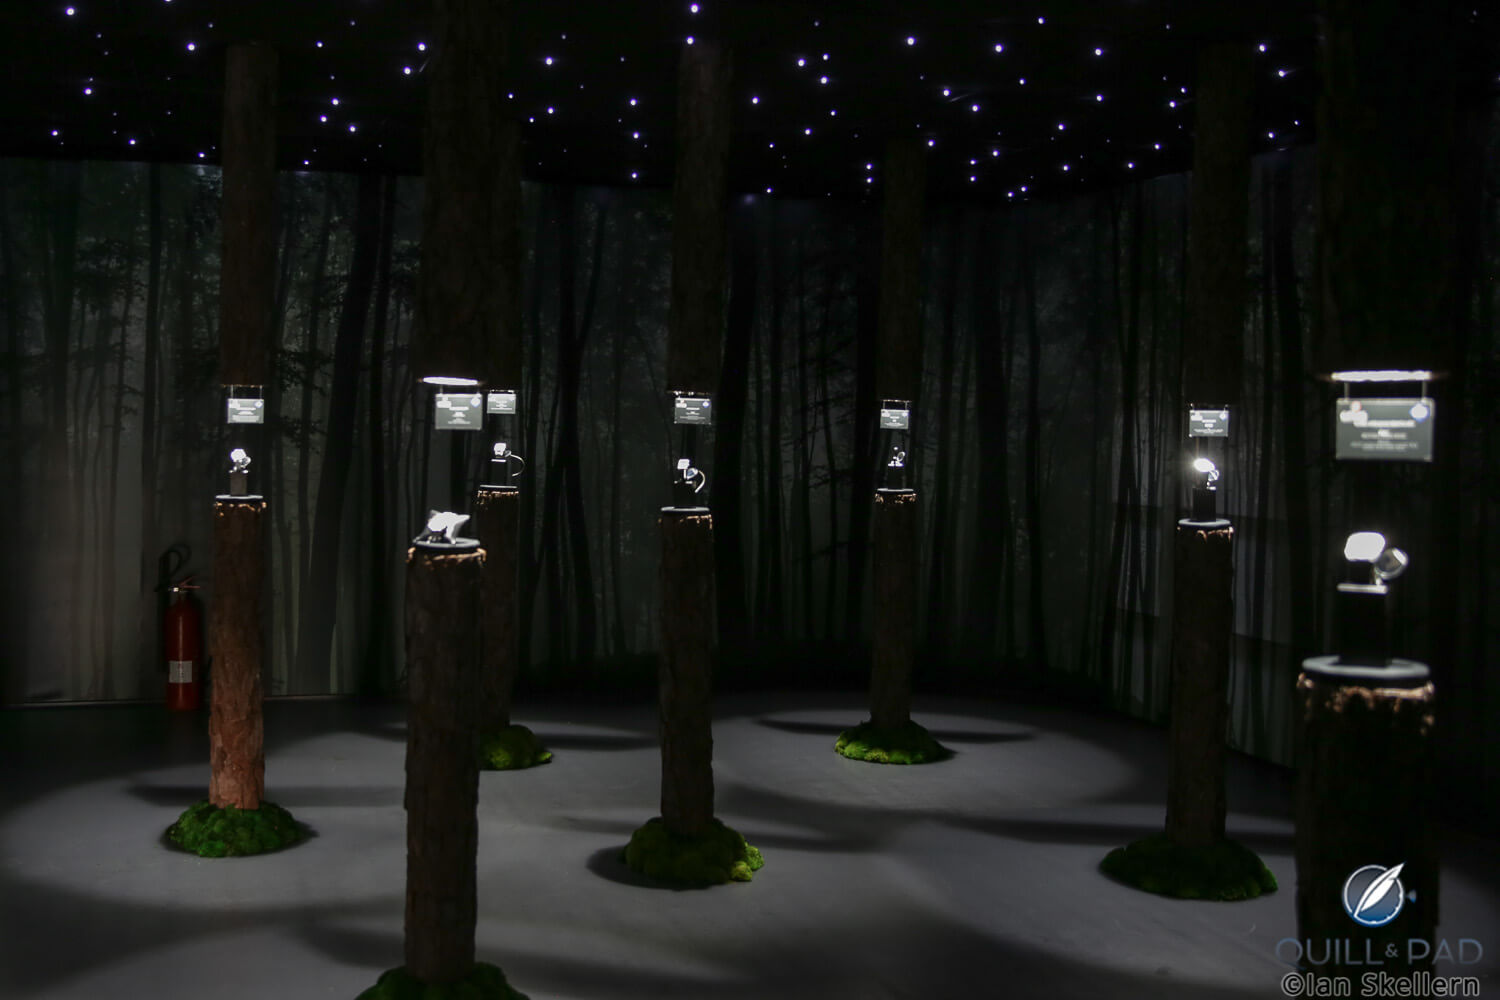 Winners of the recent 2017 Grand Prix d'Horlogerie de Genève on display in a forest-at-night themed exhibition at Dubai Watch Week